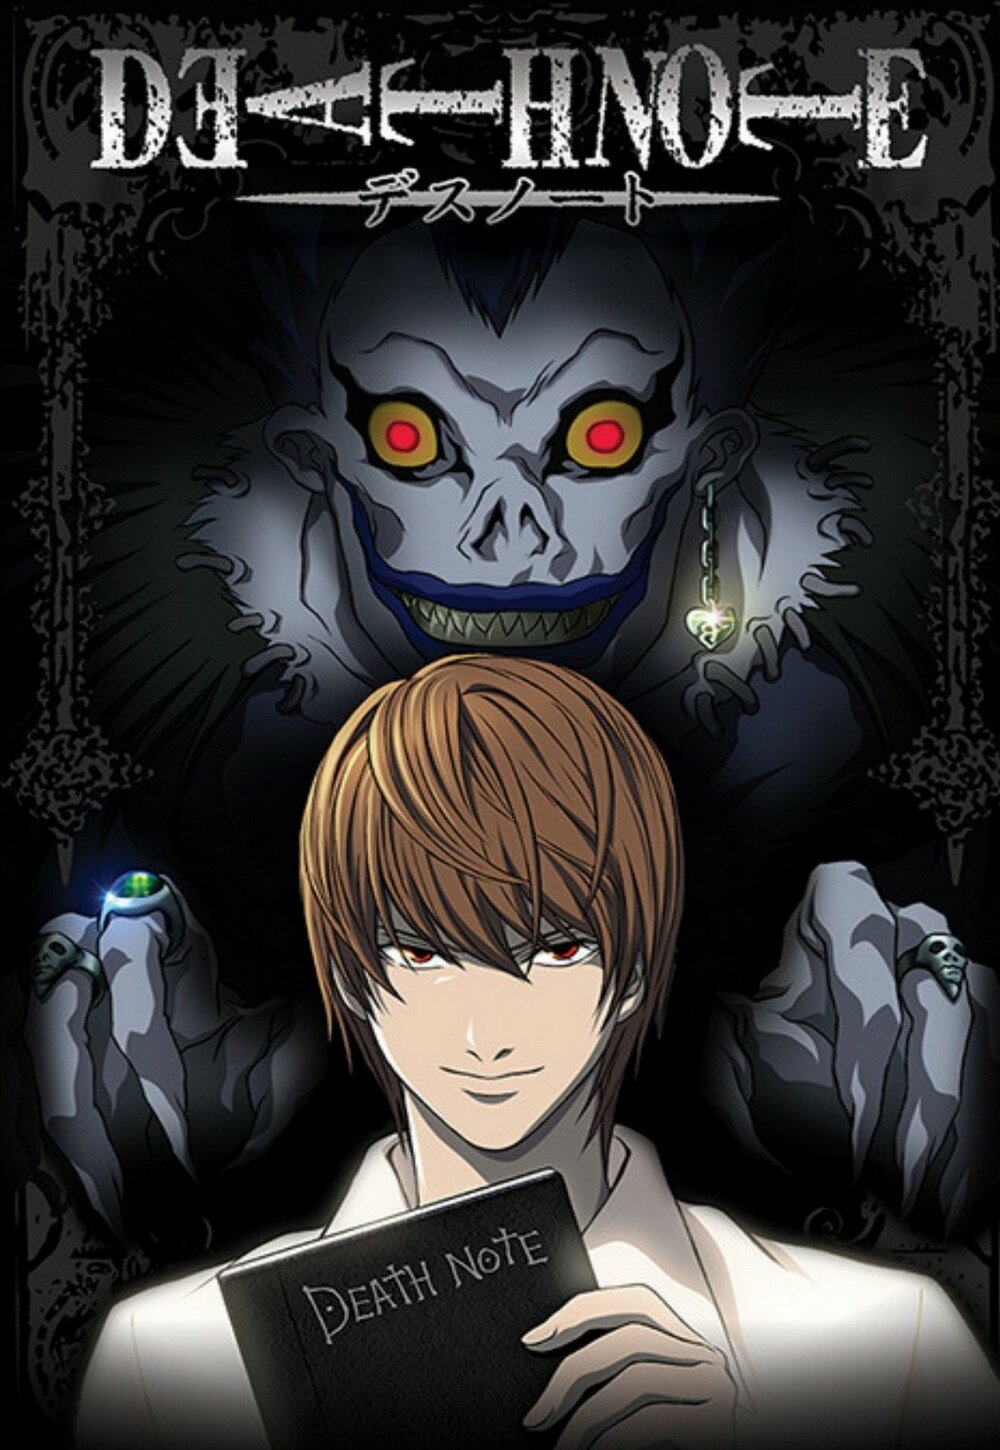 Death Note Review Anime vs Live Action 2006  Geeks